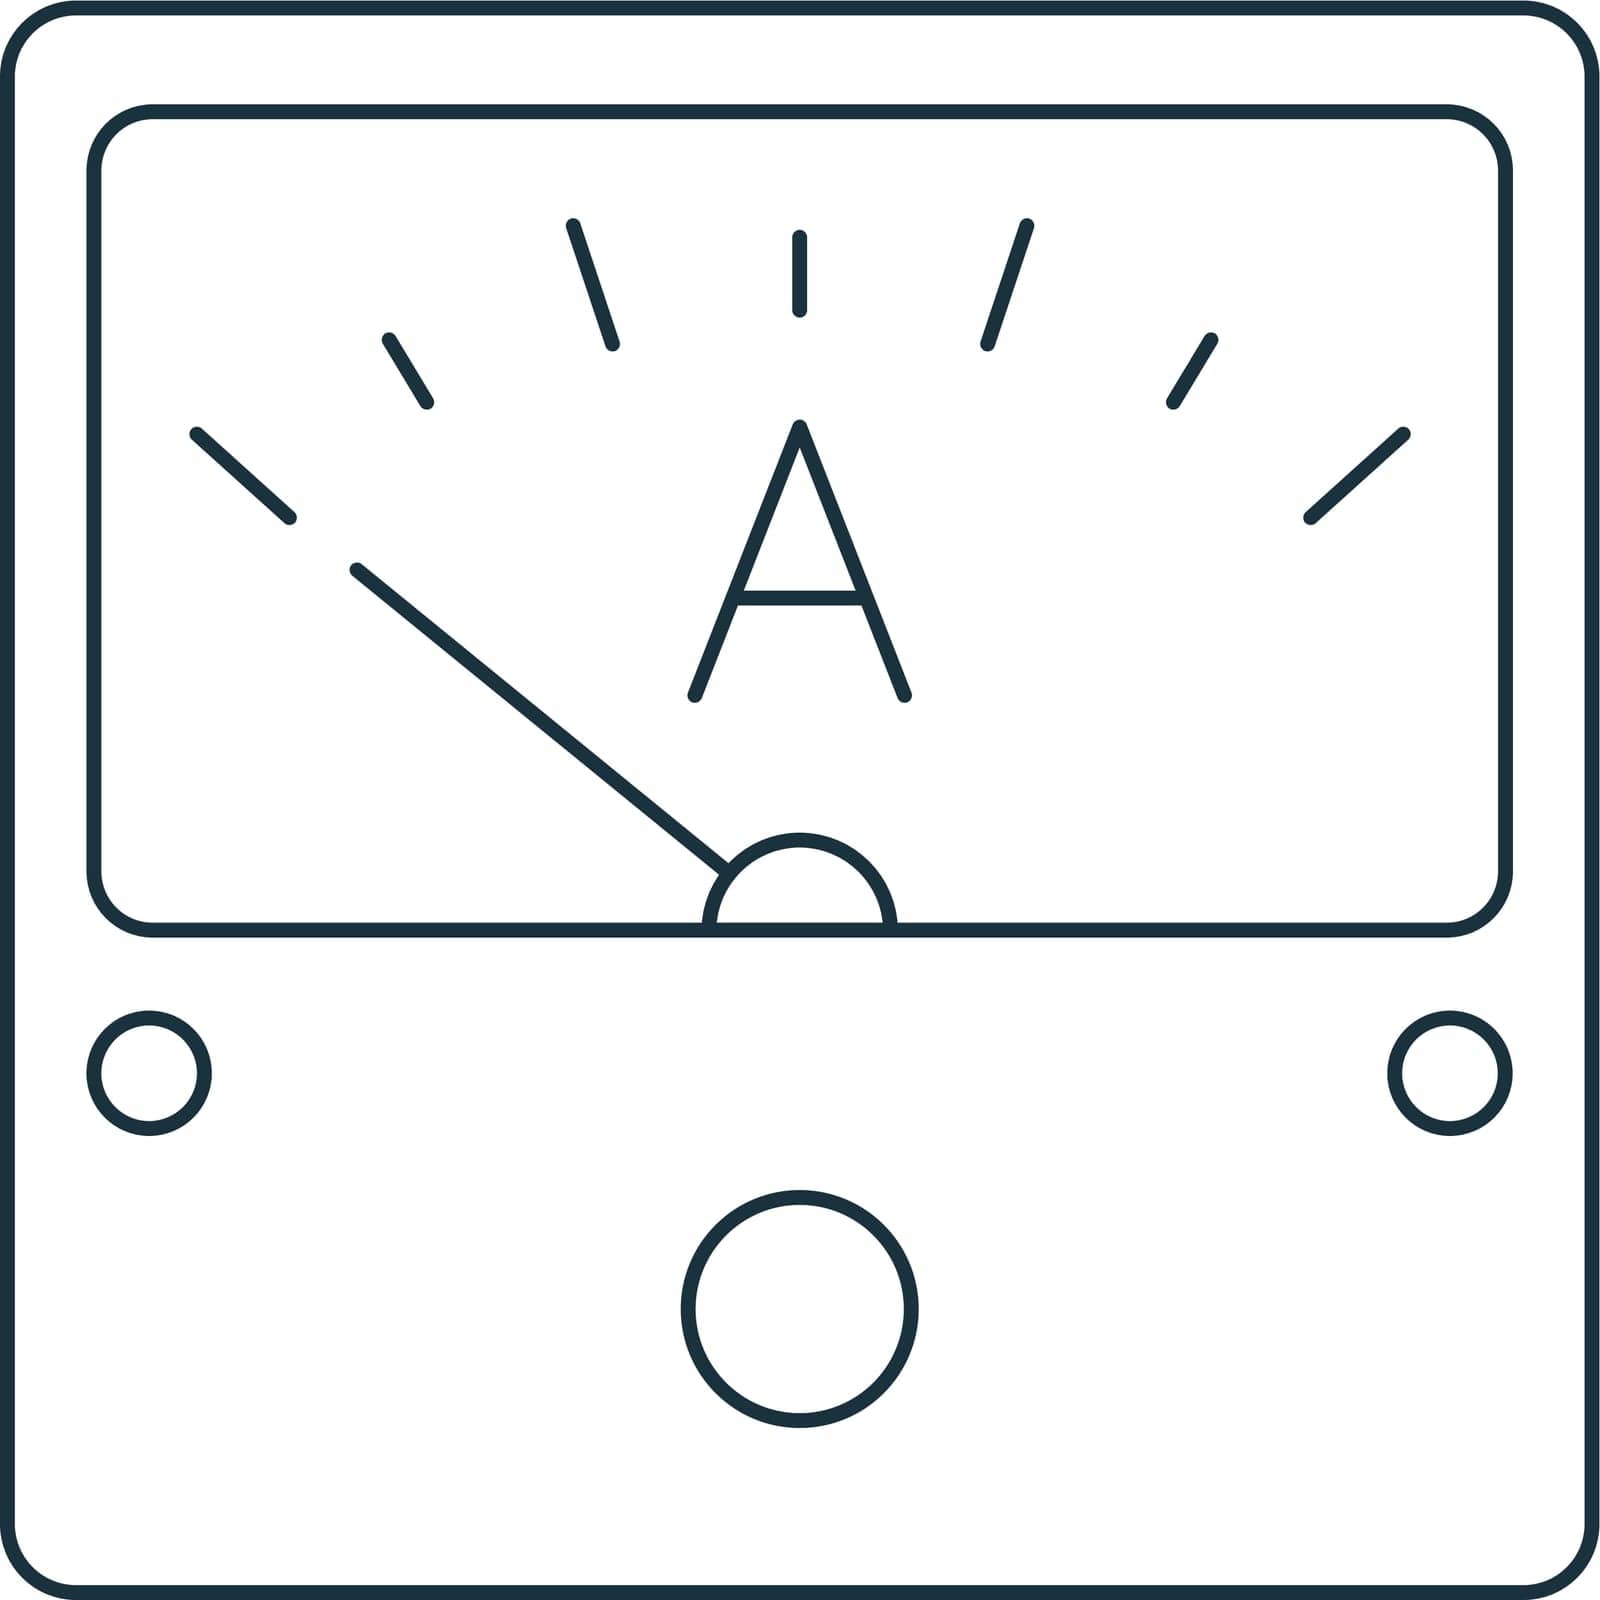 Ampere meter icon. Monochrome simple sign from construction instruments collection. Ampere meter icon for logo, templates, web design and infographics. by simakovavector